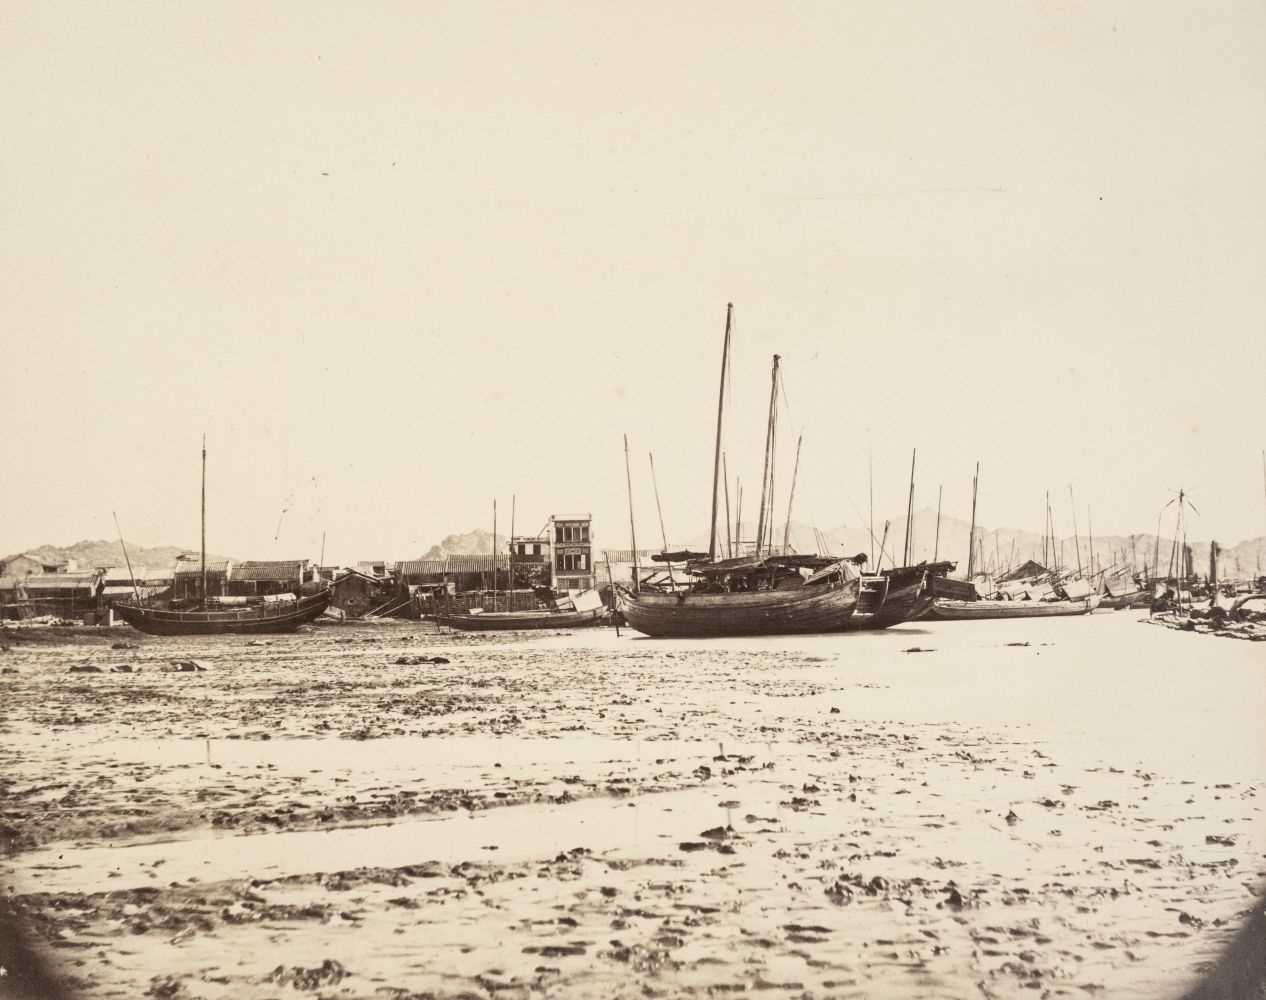 Lot 41 - China. Boats at low tide at Swatow [Shantou], by Henry Charles Cammidge (1839-1874), c. 1870